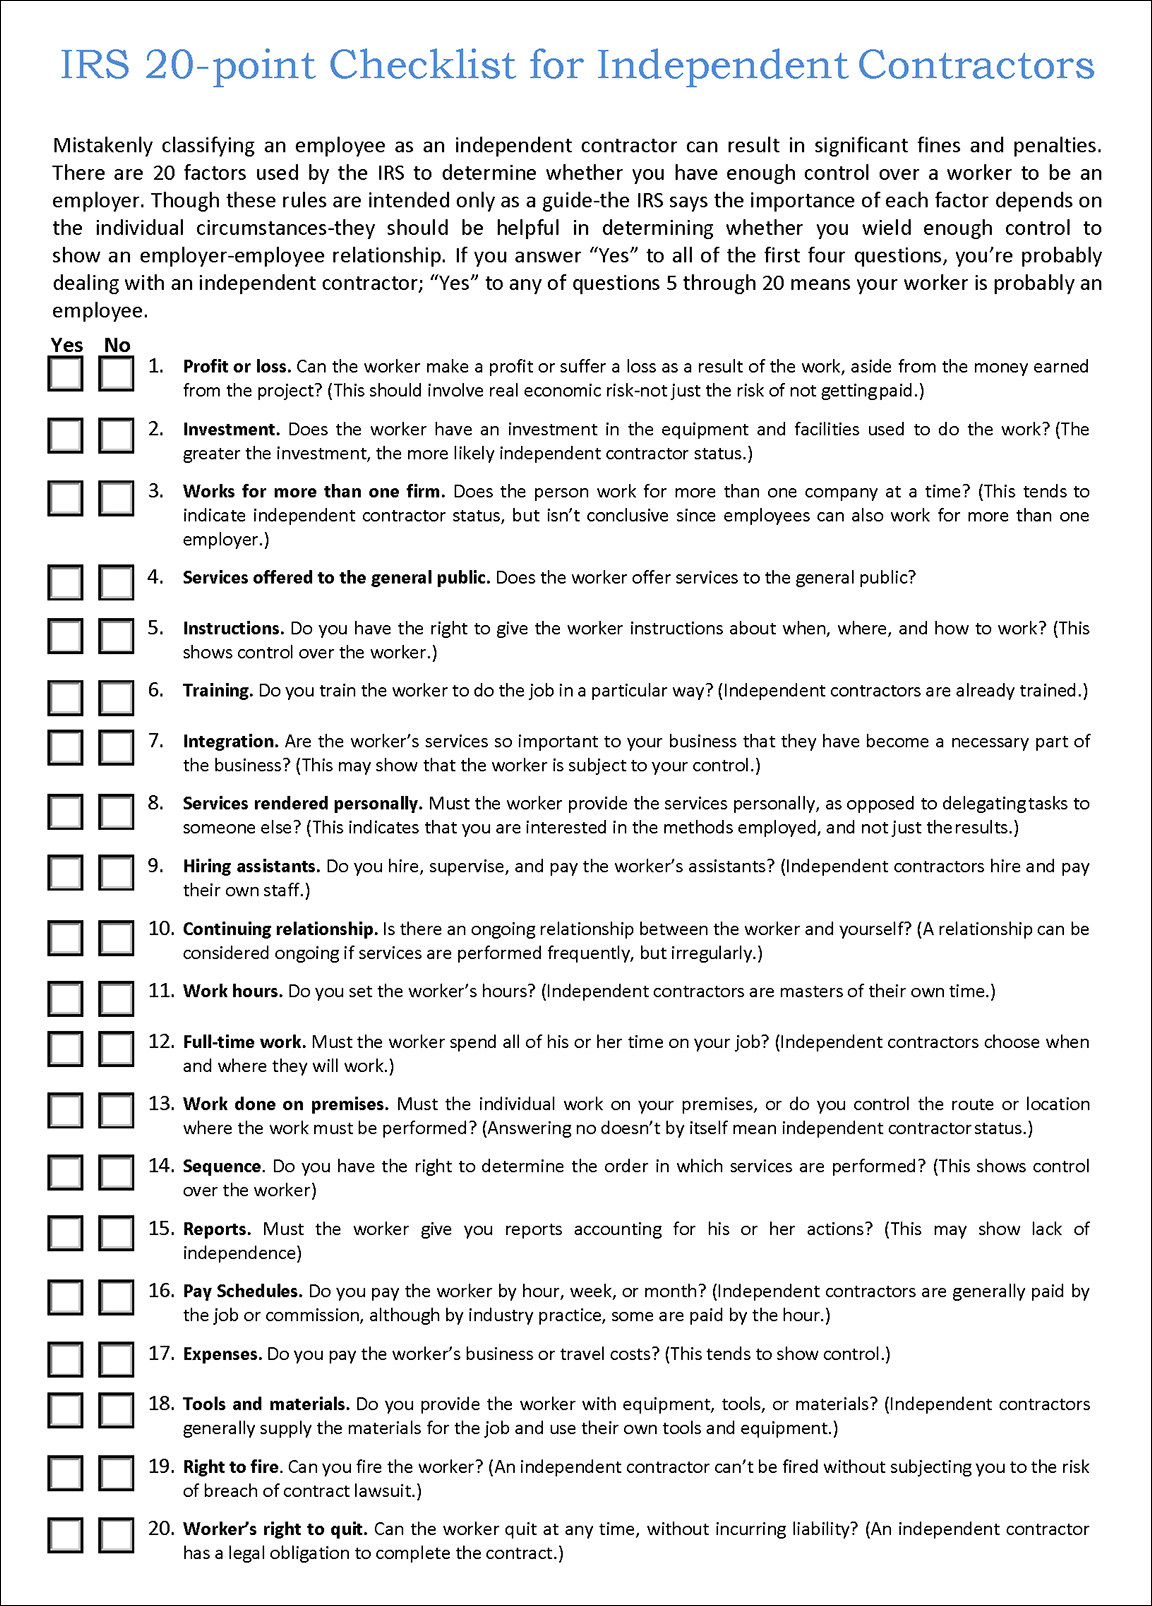 IRS 20-point Checklist for Independent Contractors